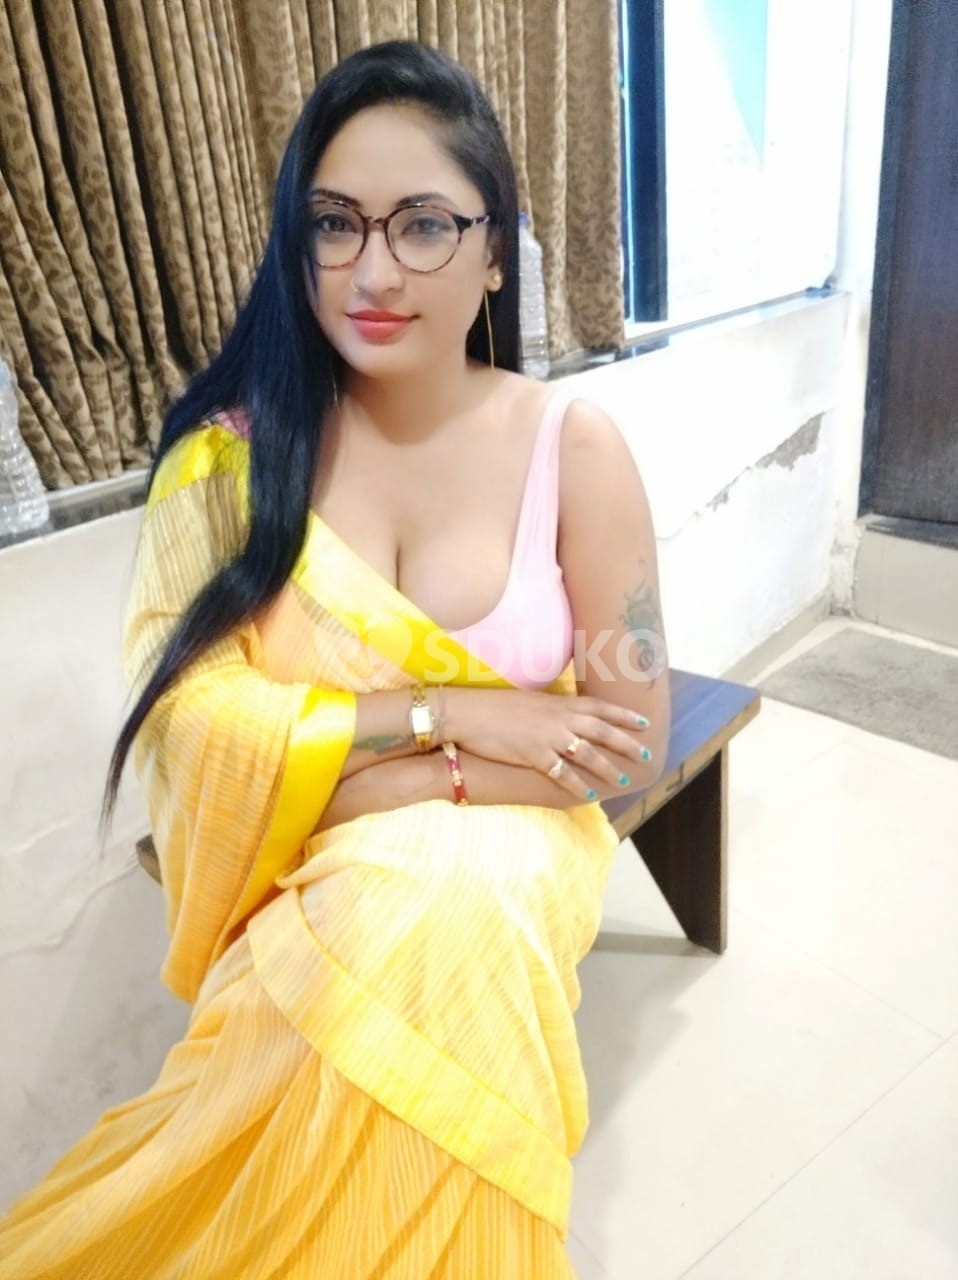 Mysore soumya gowda 💯 guaranteed hot figure best high profile full safe and secure today low budget college girl now 